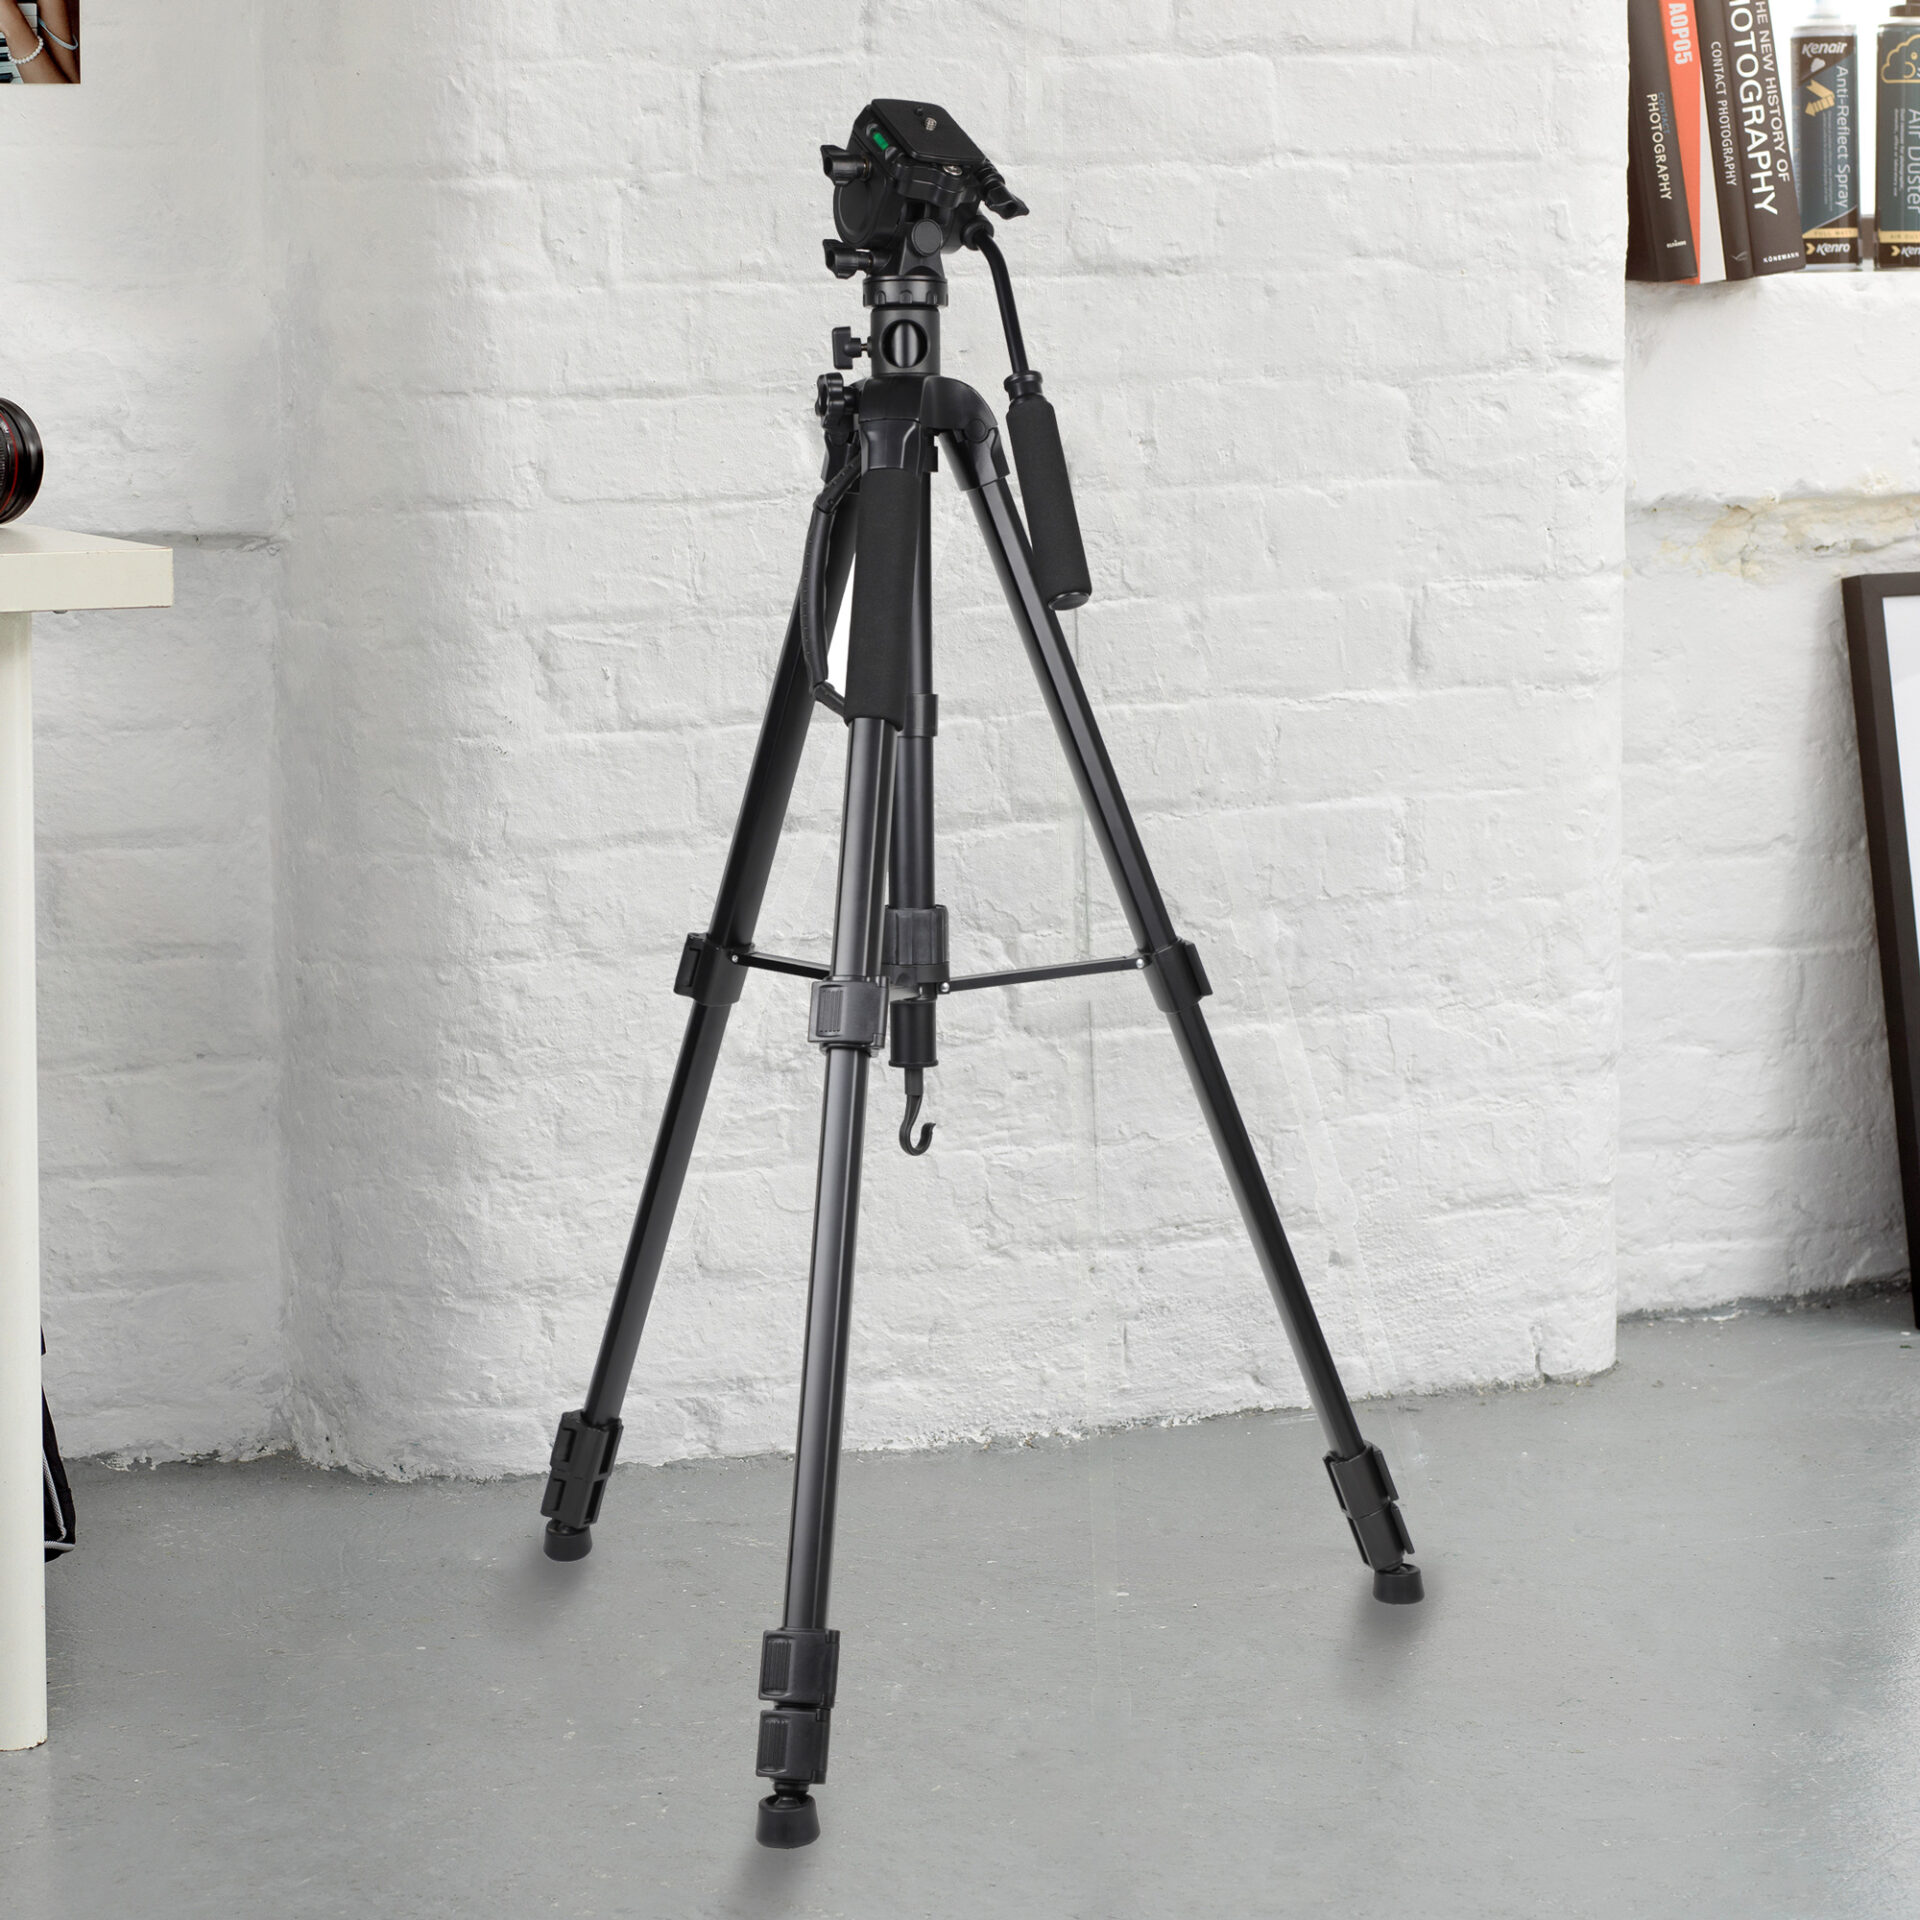 Kenro Karoo Photo & Video Tripod Kit fully extended on a white floor against a white brick wall, highlighting its tall stature and sturdy leg design for professional use.